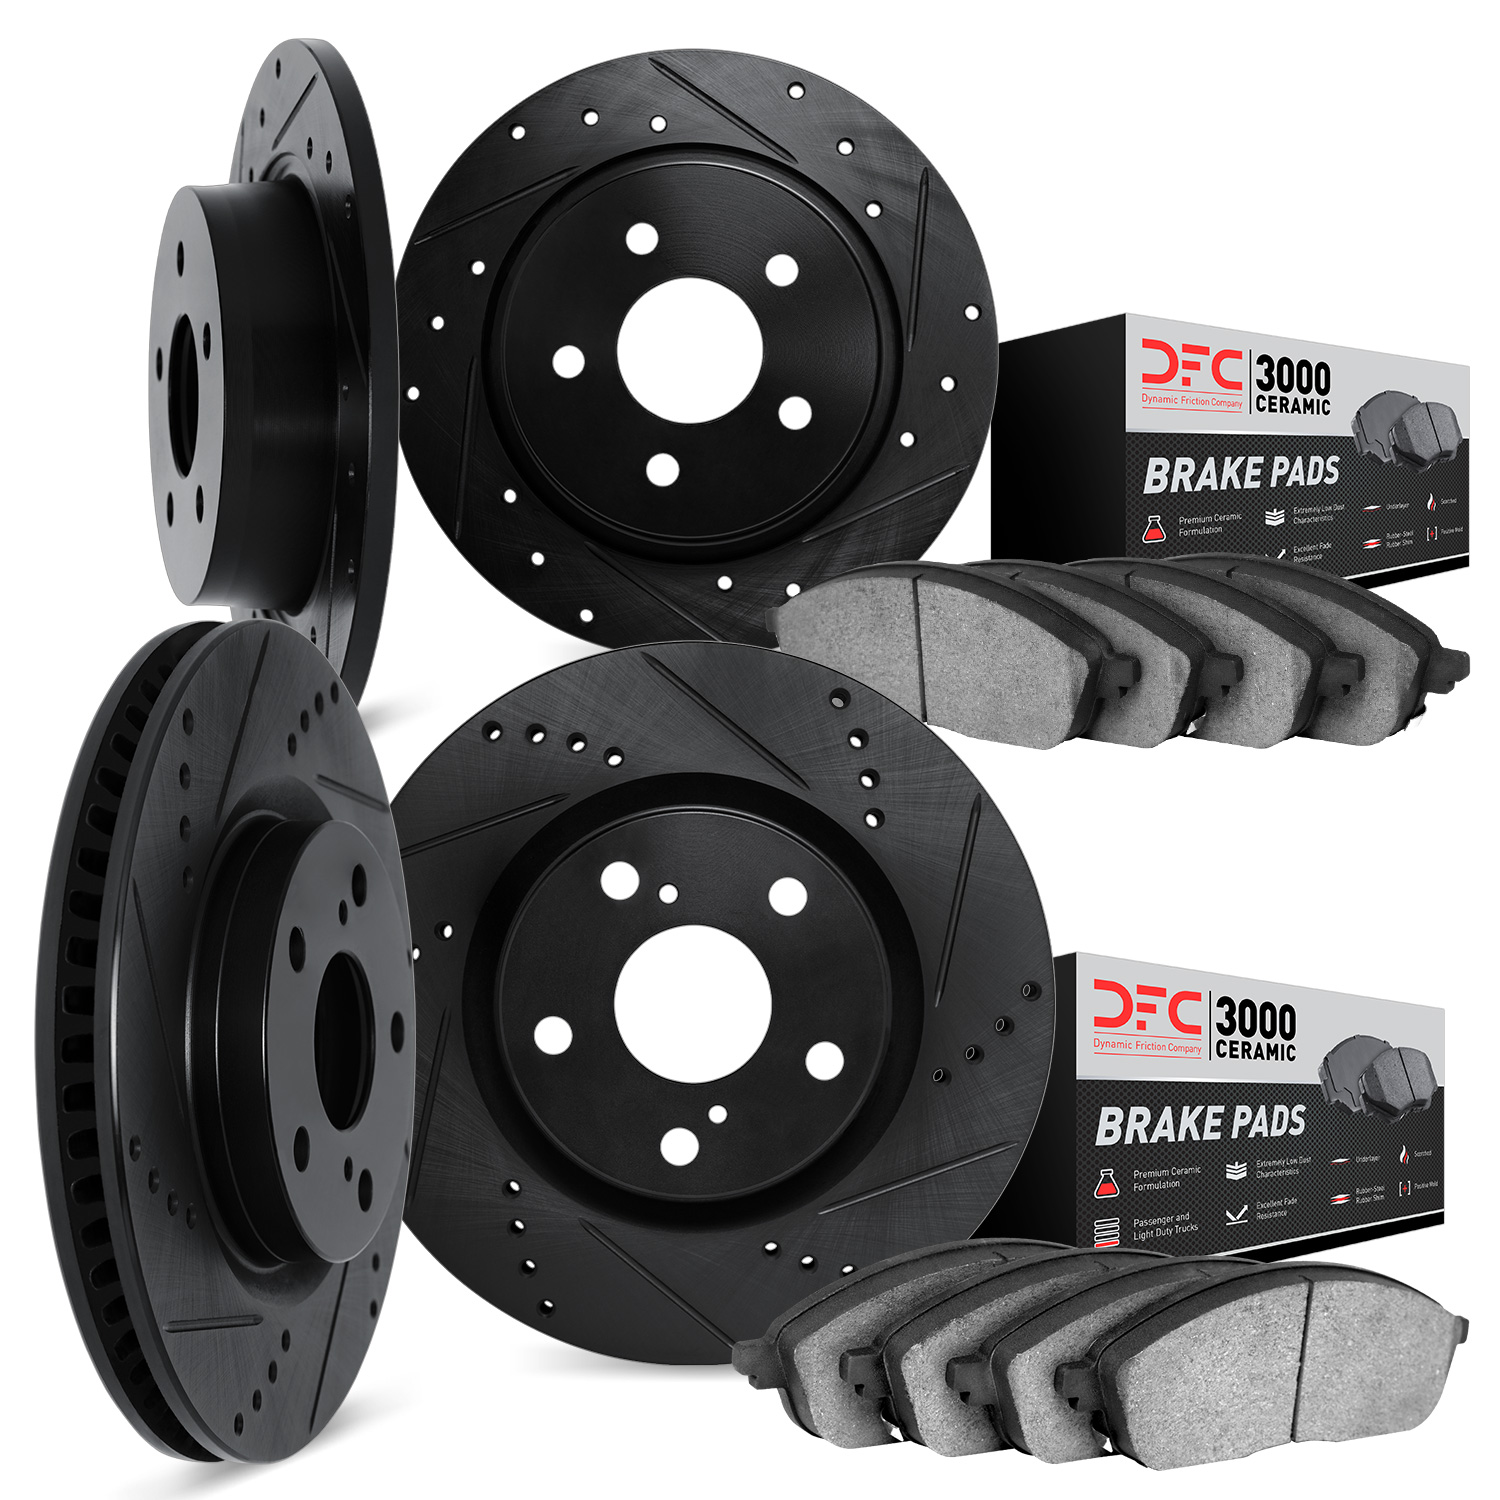 8304-59061 Drilled/Slotted Brake Rotors with 3000-Series Ceramic Brake Pads Kit [Black], 2010-2015 Acura/Honda, Position: Front